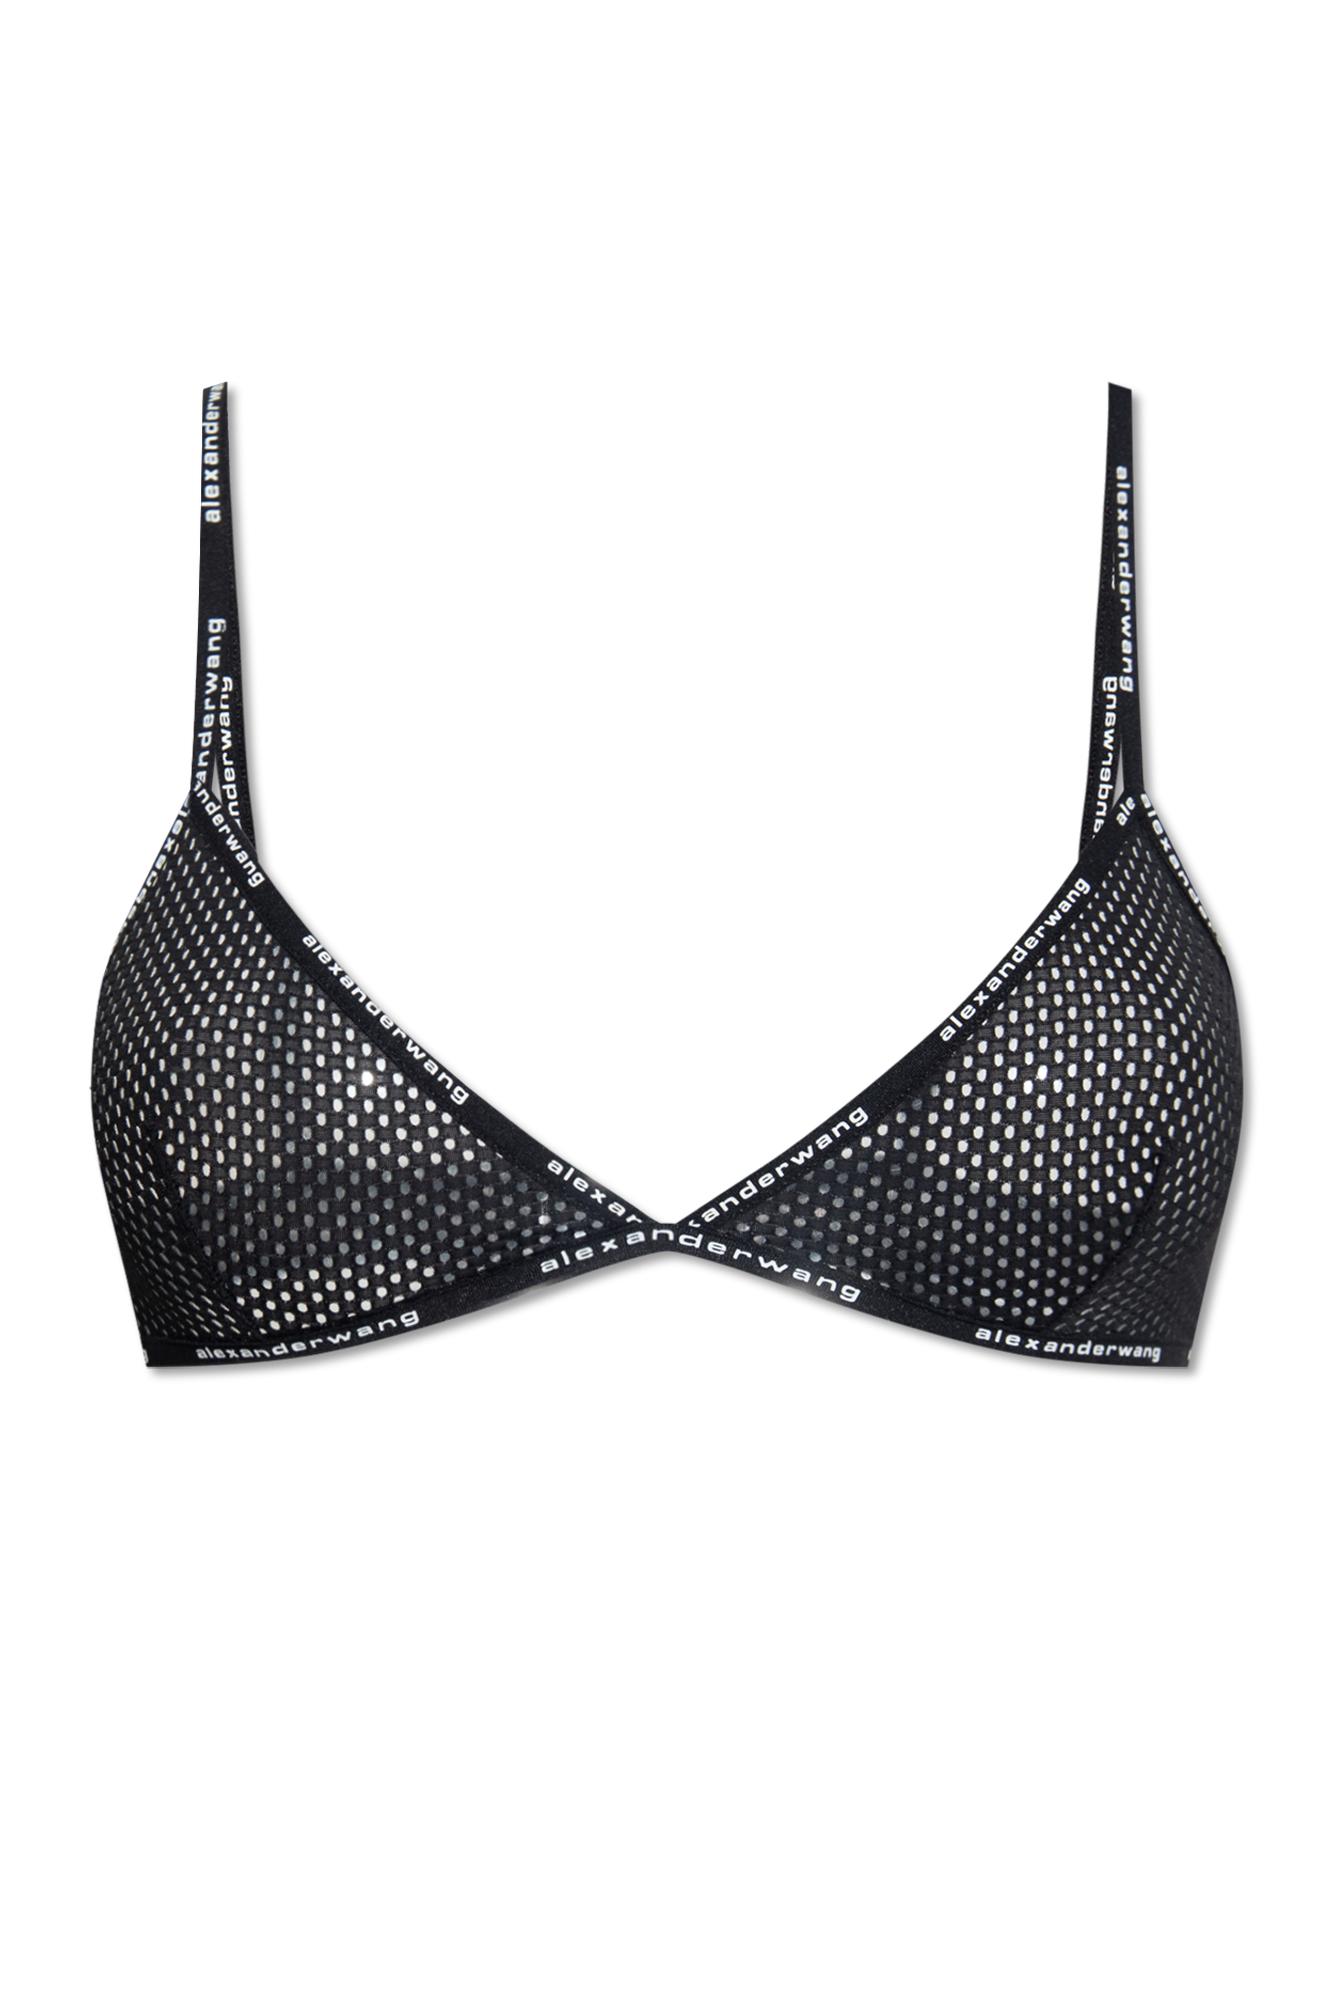 ALEXANDER WANG EXCLUSIVE LOGO ELASTIC BRA BLACK, Women's Fashion, Tops,  Others Tops on Carousell